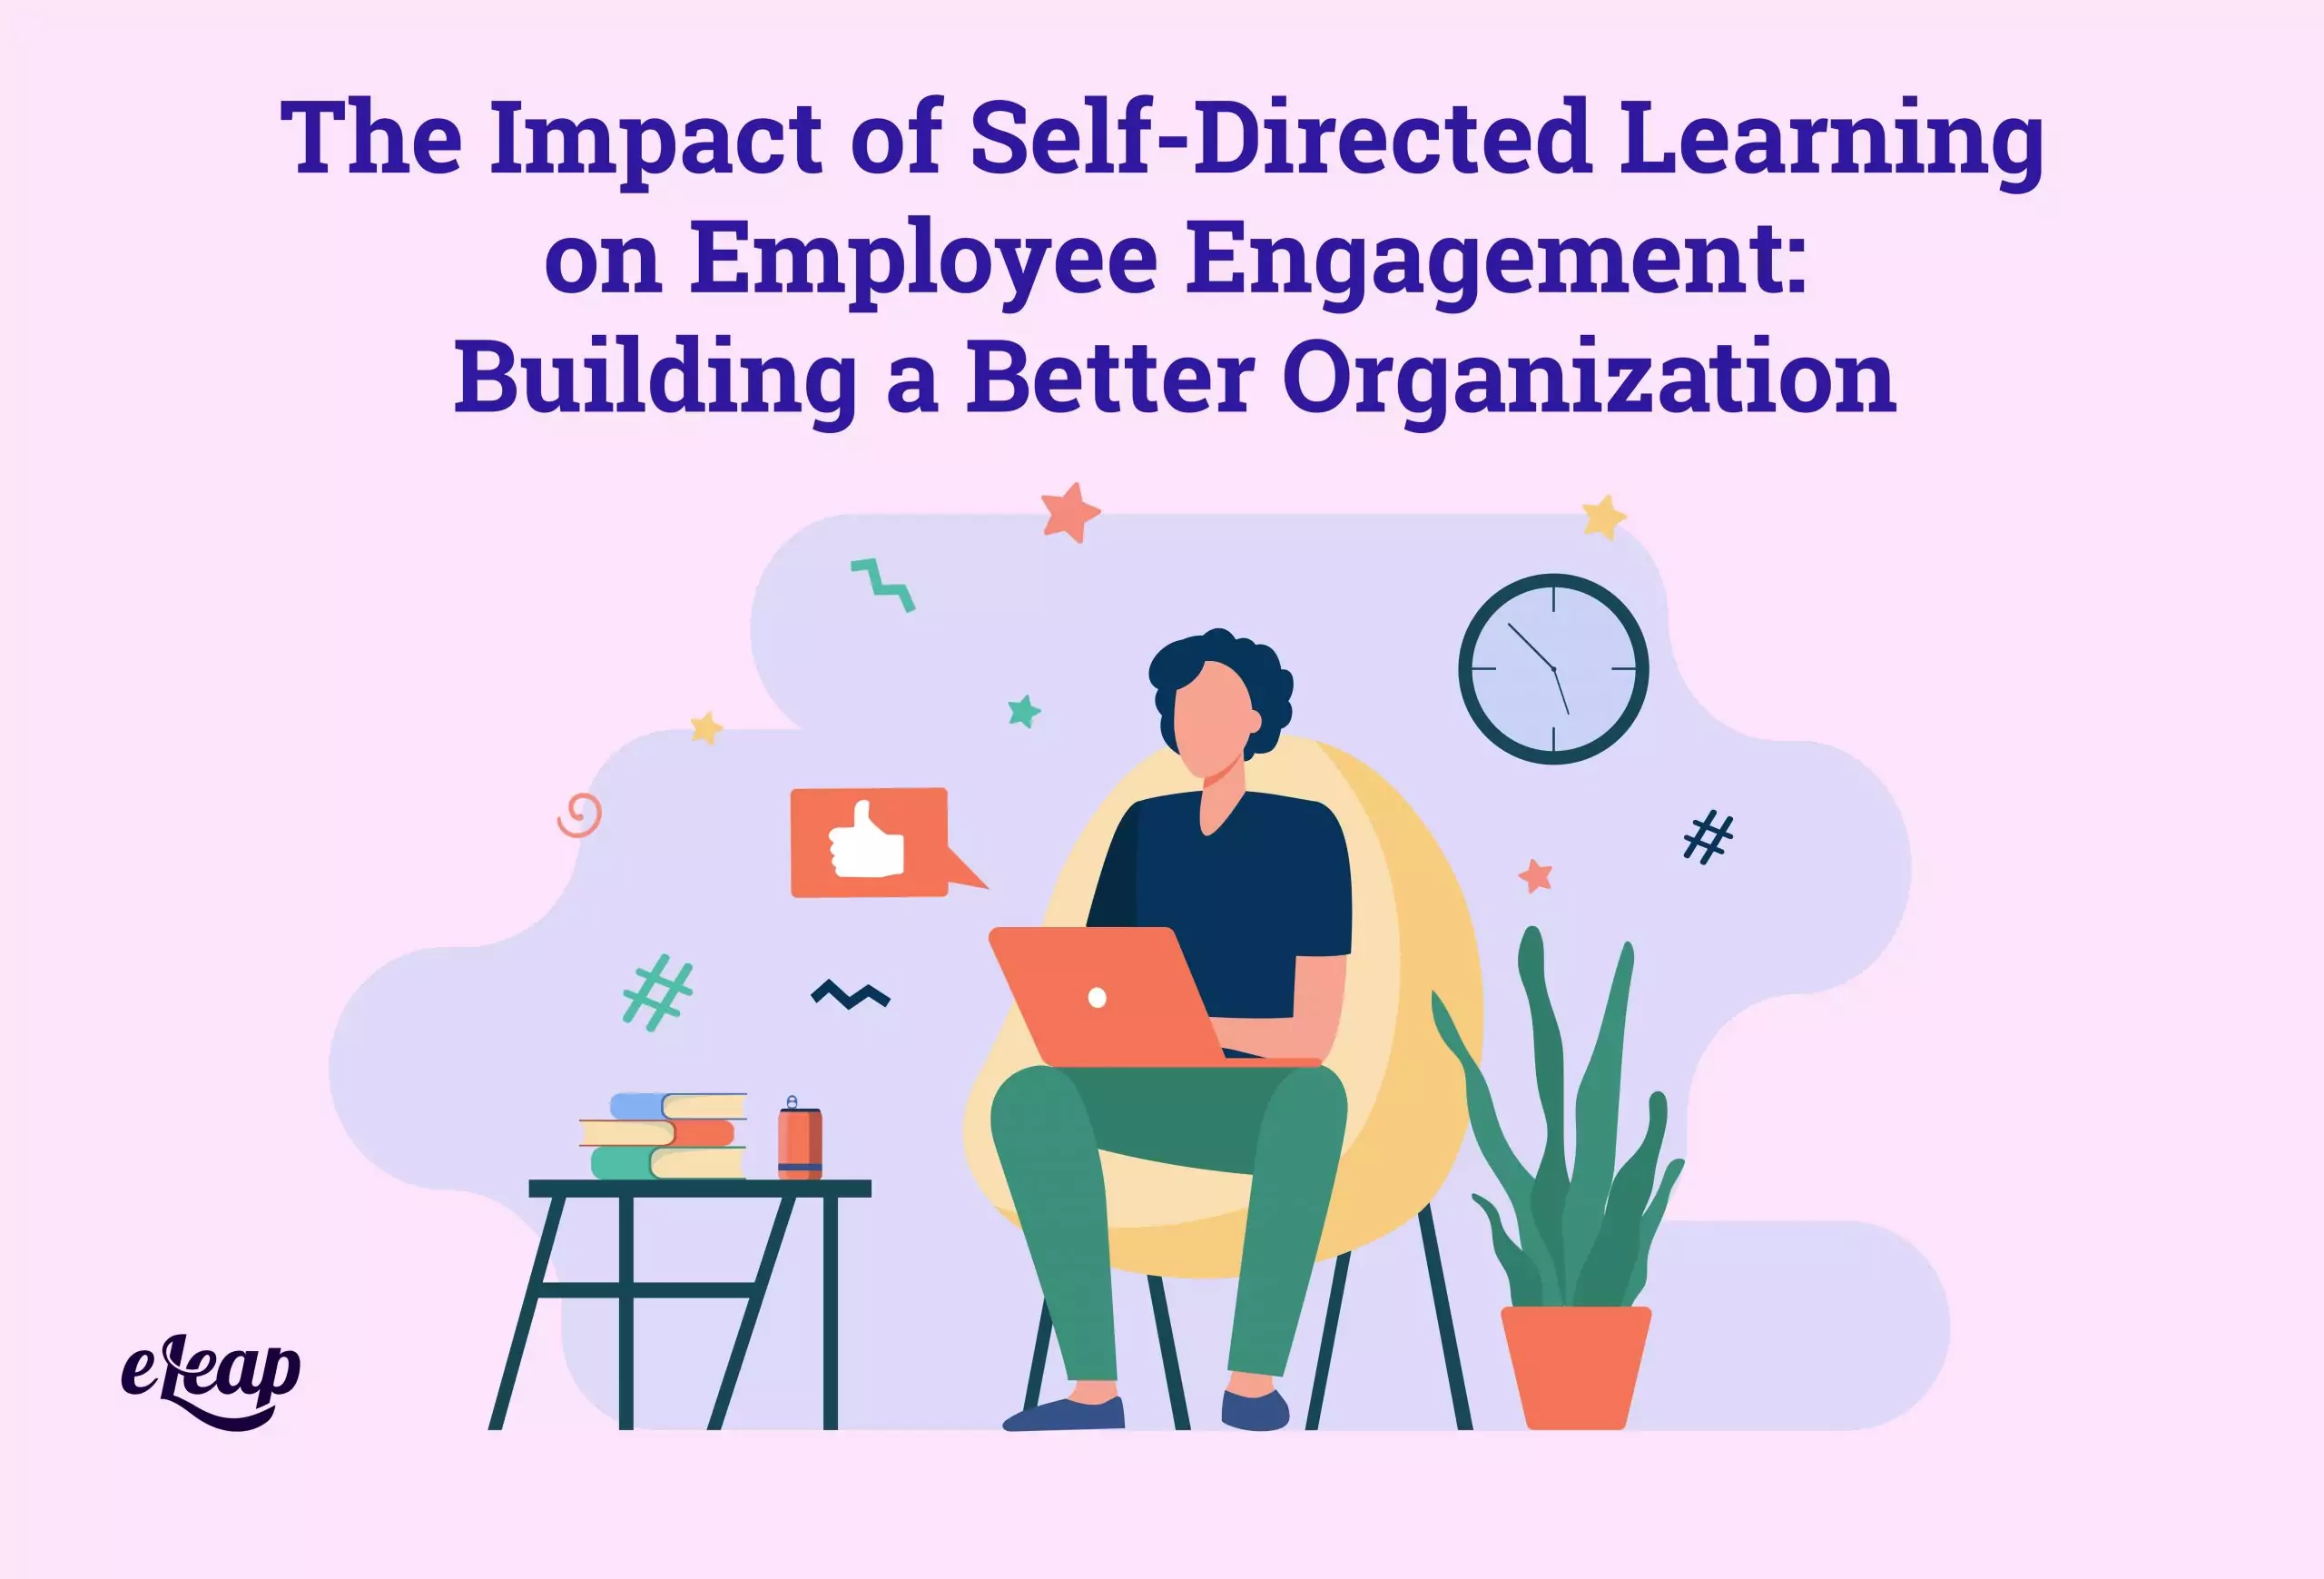 The Impact of Self-Directed Learning on Employee Engagement: Building a Better Organization